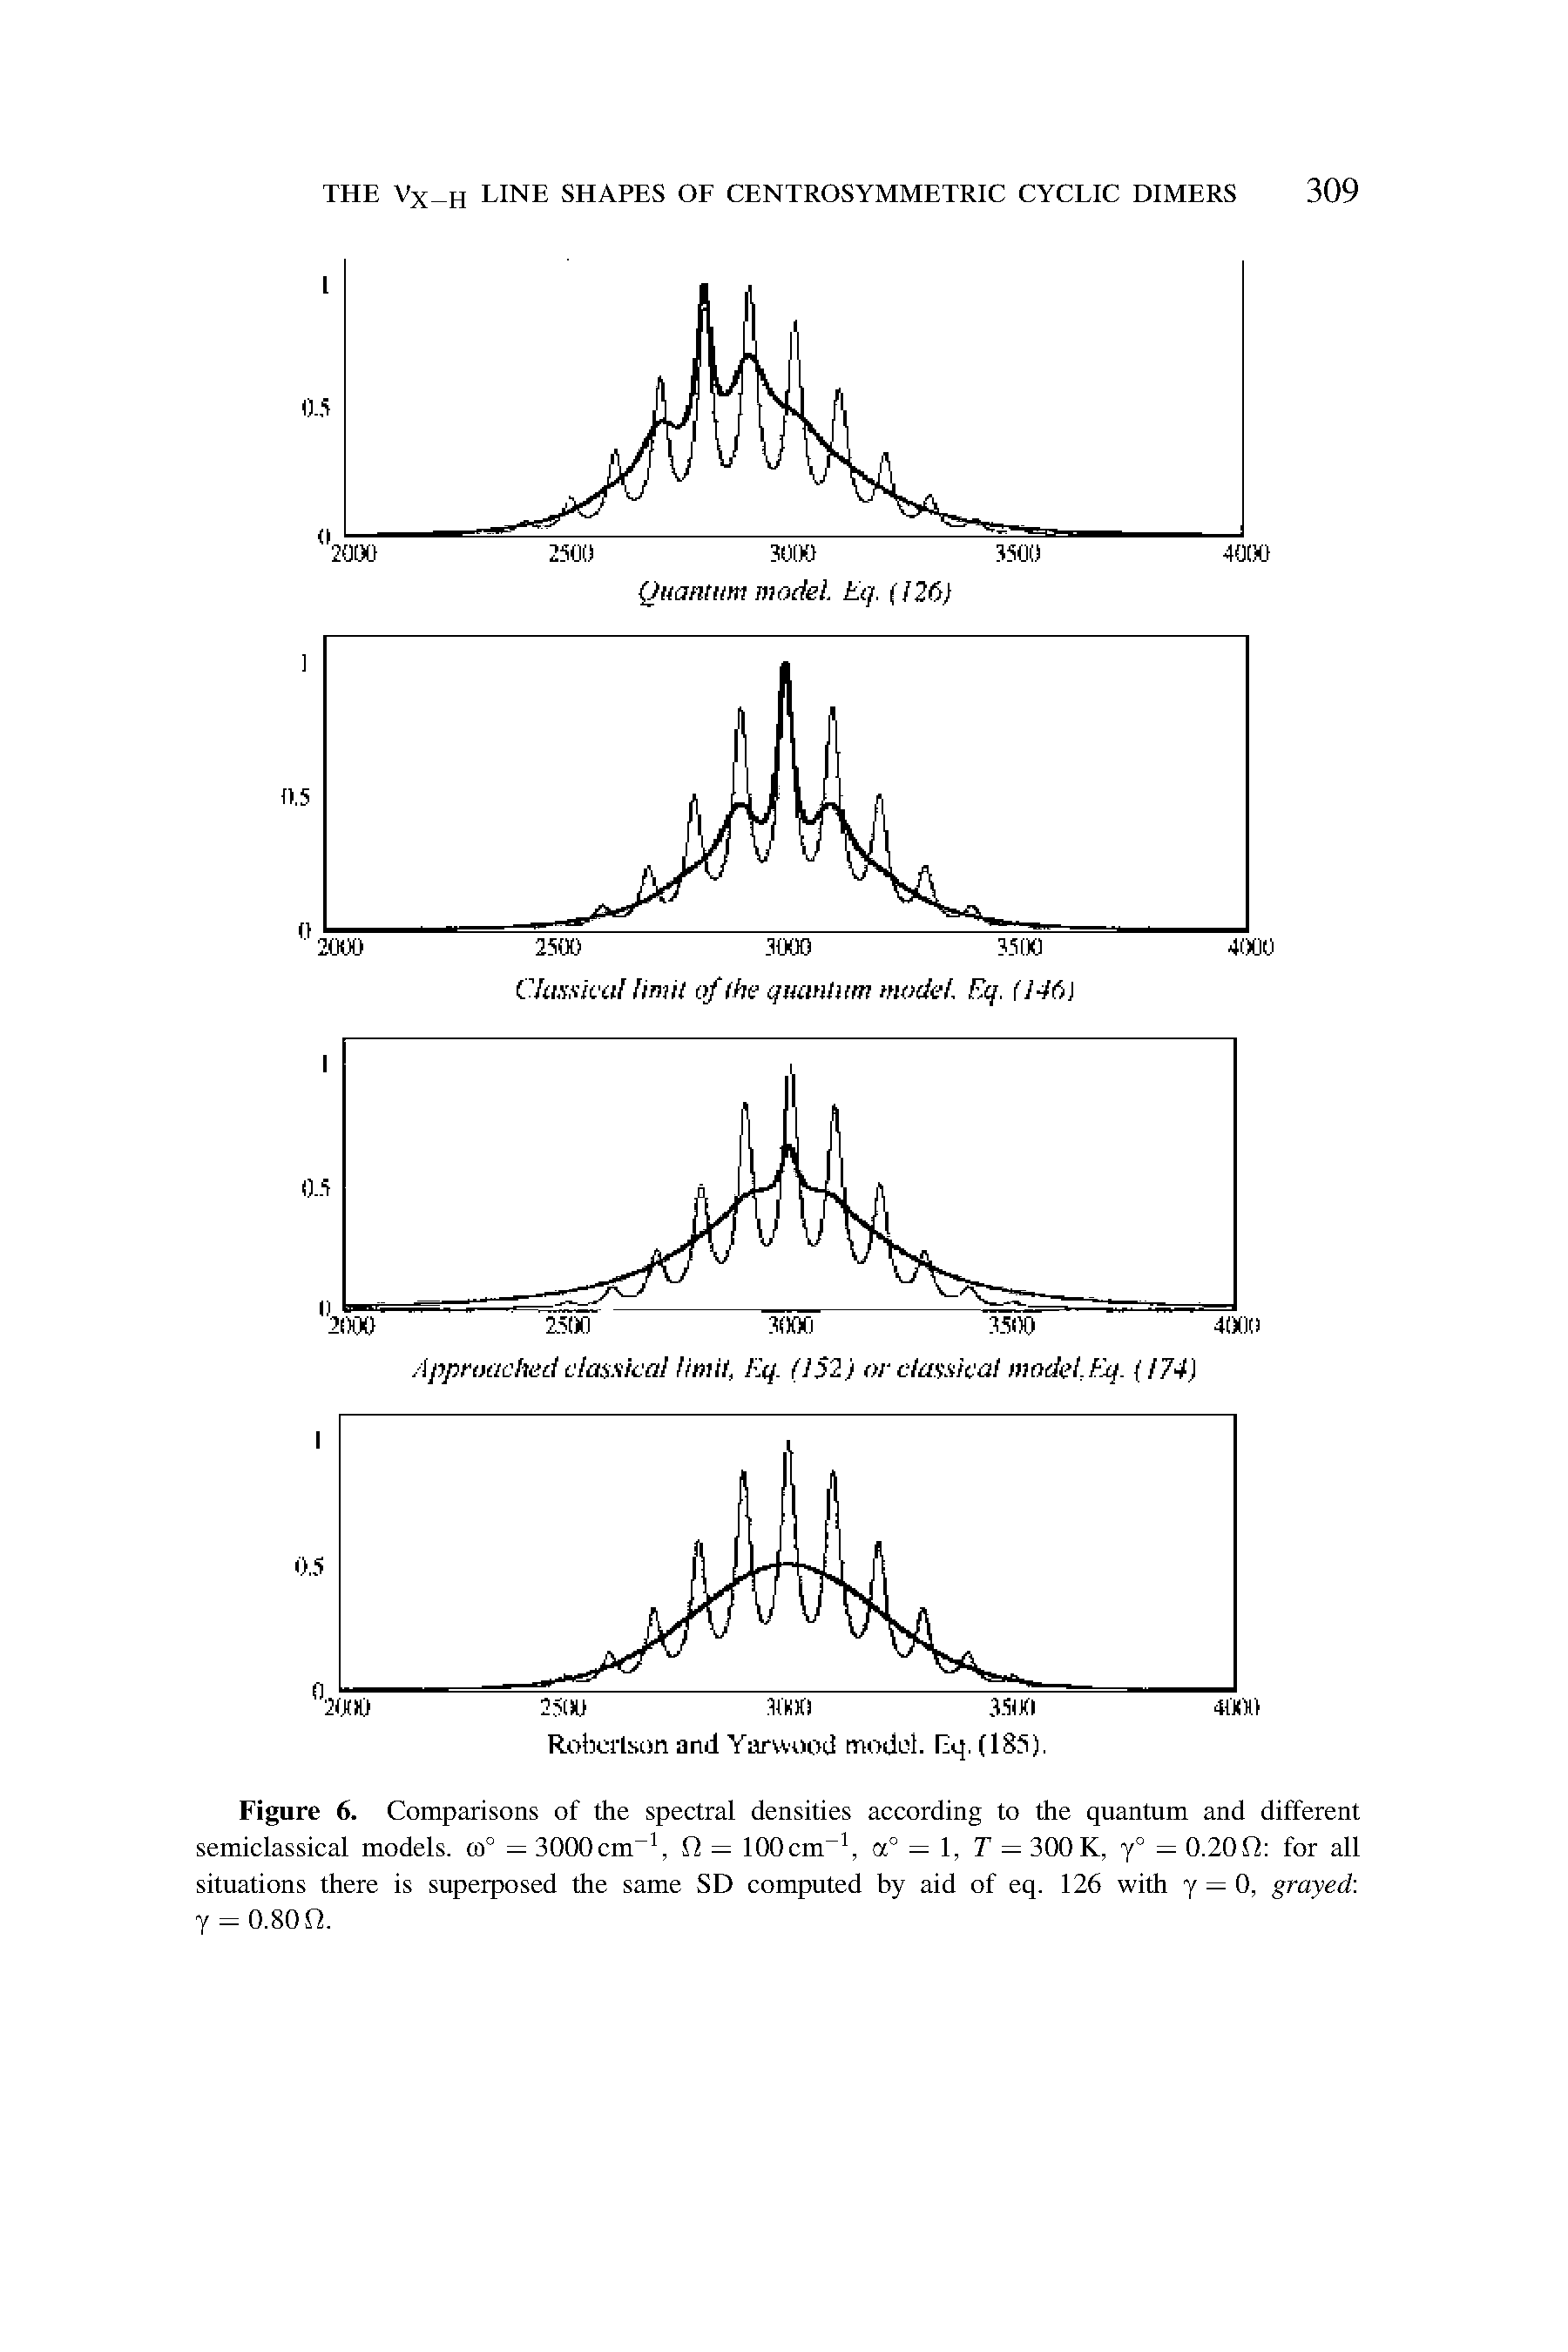 Figure 6. Comparisons of the spectral densities according to the quantum and different semiclassical models. co° = 3000cm-1, El = 100cm-1, a° = 1, T = 300K, y° = 0.200 for all situations there is superposed the same SD computed by aid of eq. 126 with y = 0, grayed, y = 0.80 n.